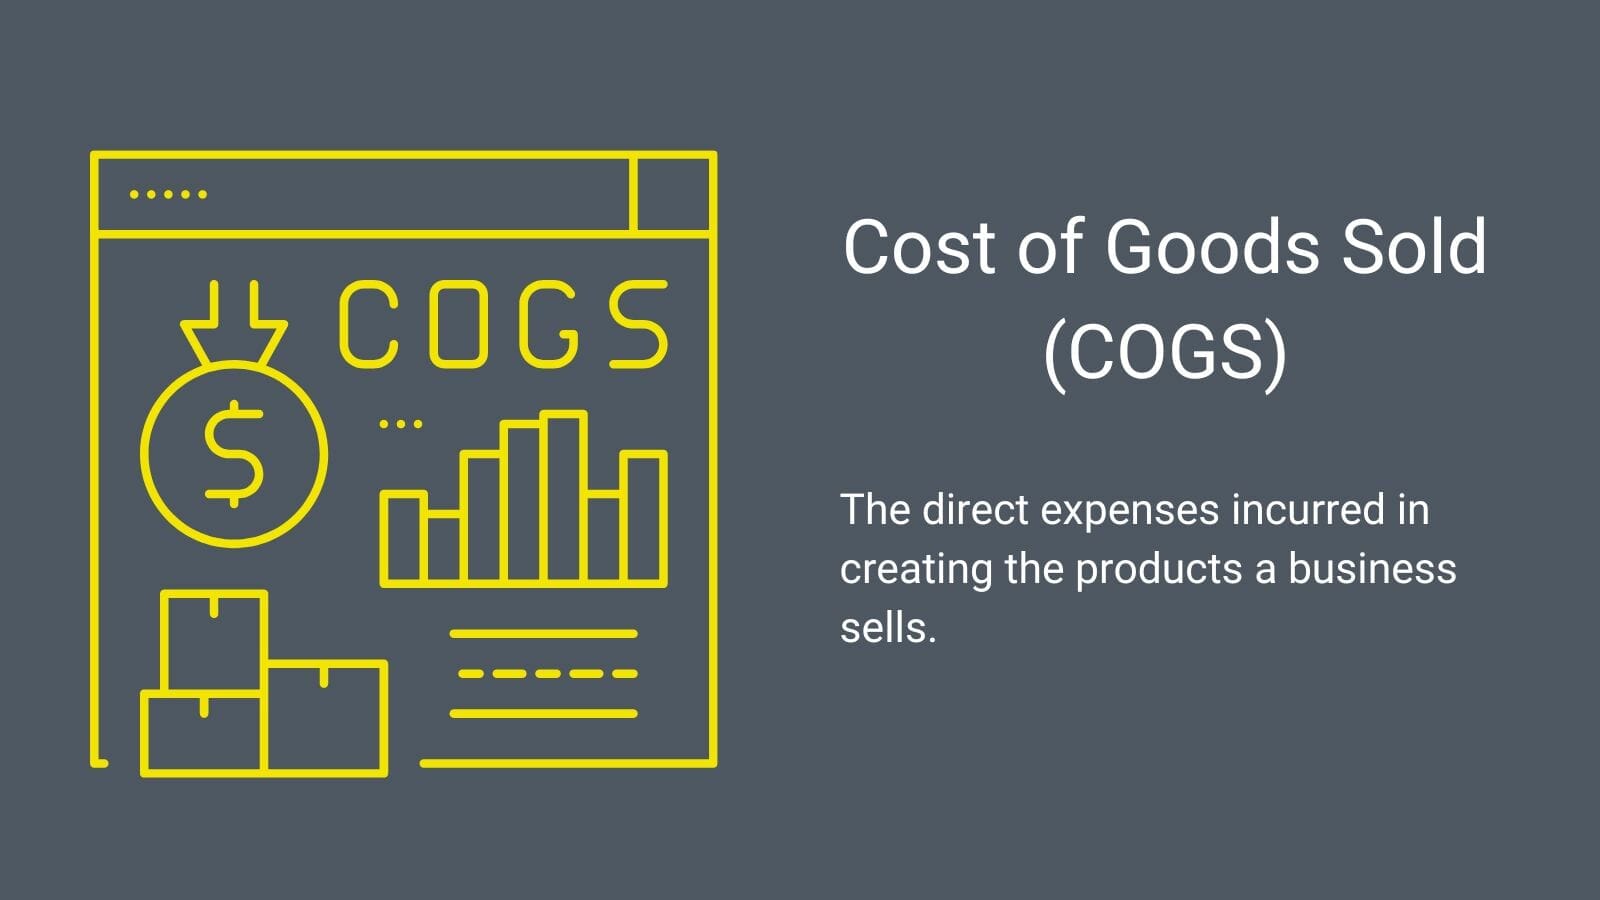 Cost of Goods Sold (COGS) by the Weighted Average Method